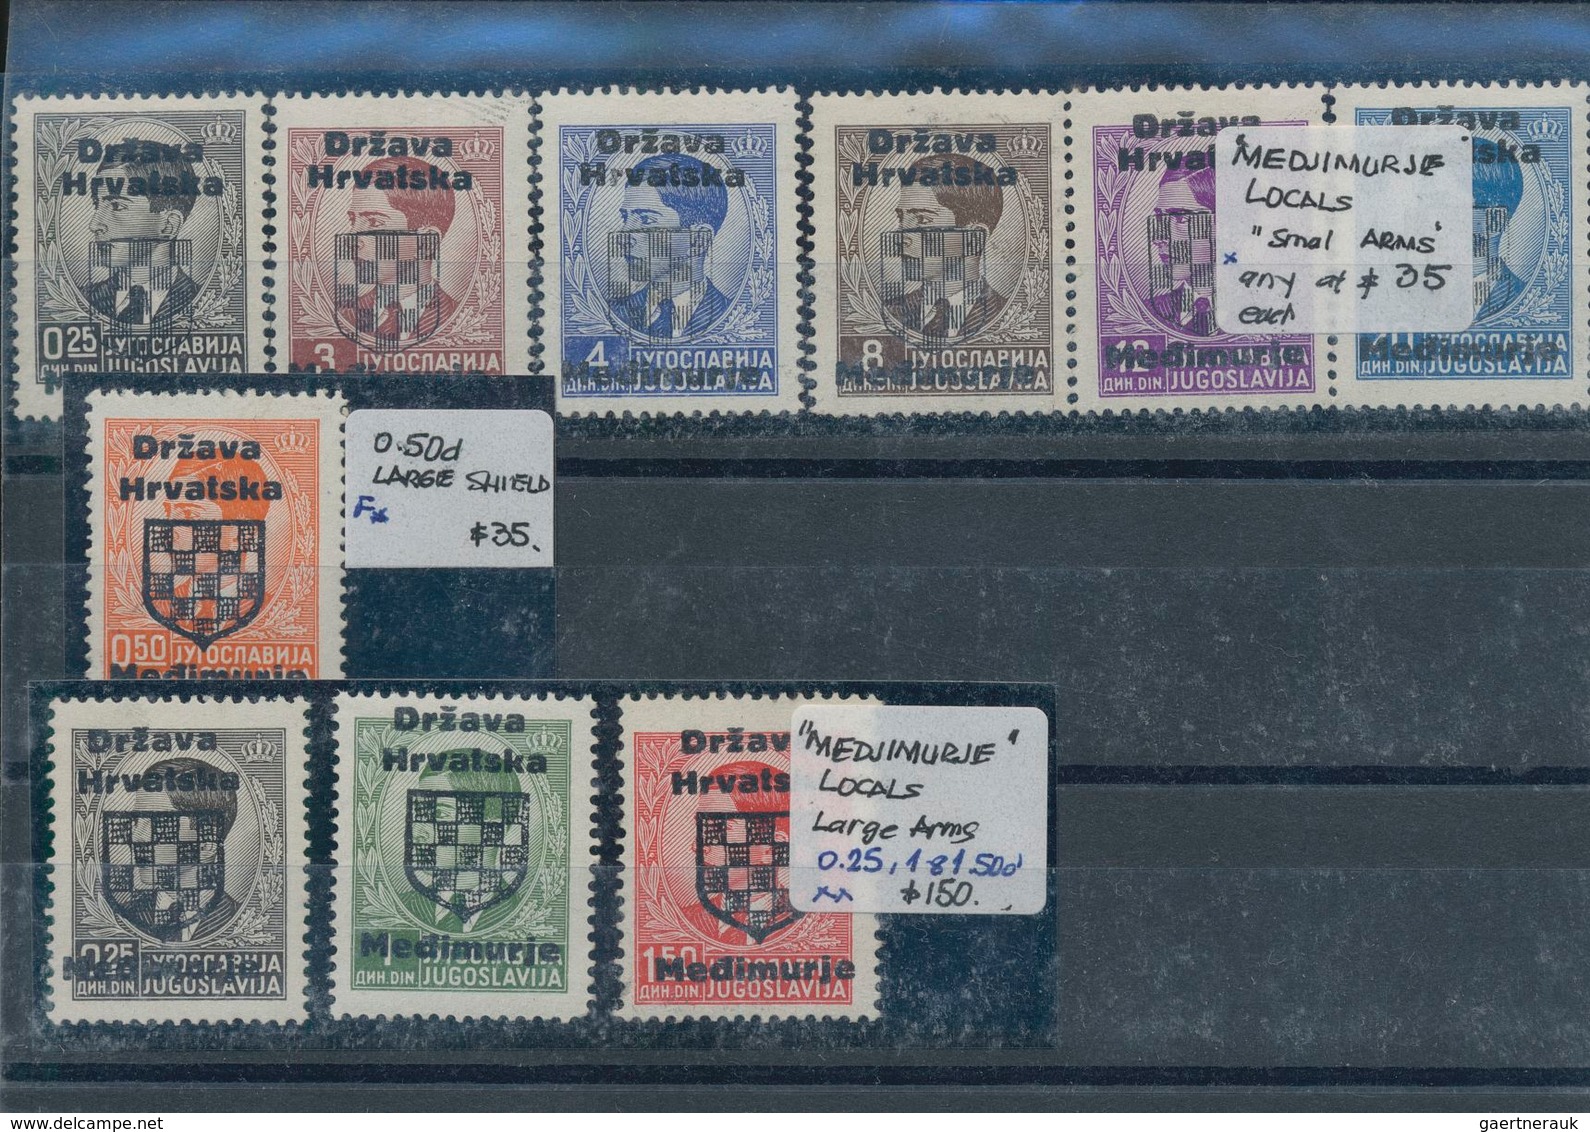 Kroatien: 1941/1945, mint and used holding on stockcards in two small binders, well sorted throughou